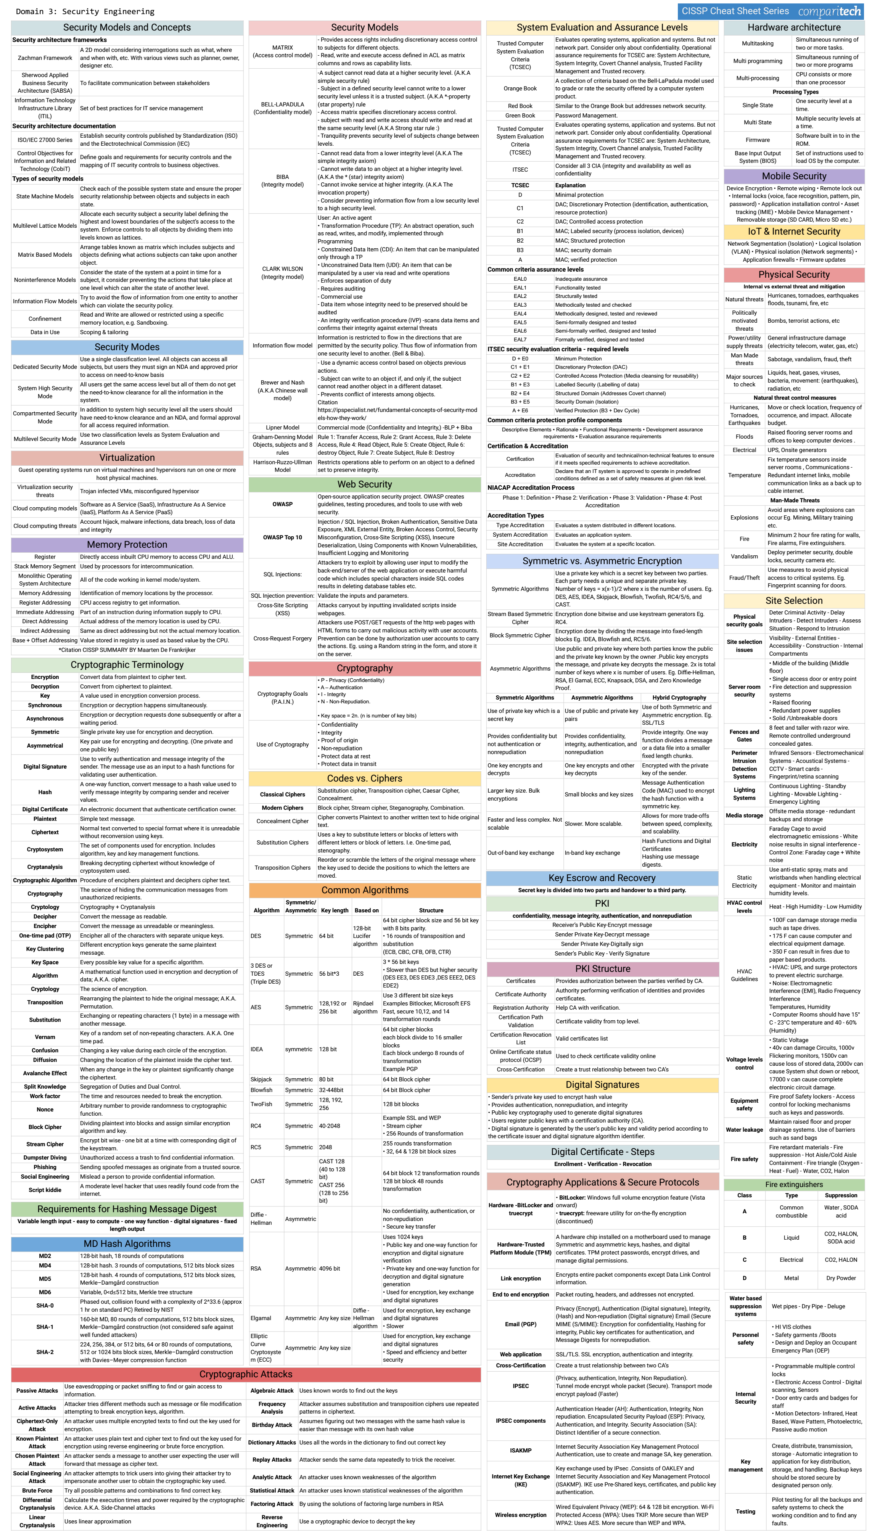 Cheat sheets for studying for the CISSP exam Security Architecture and